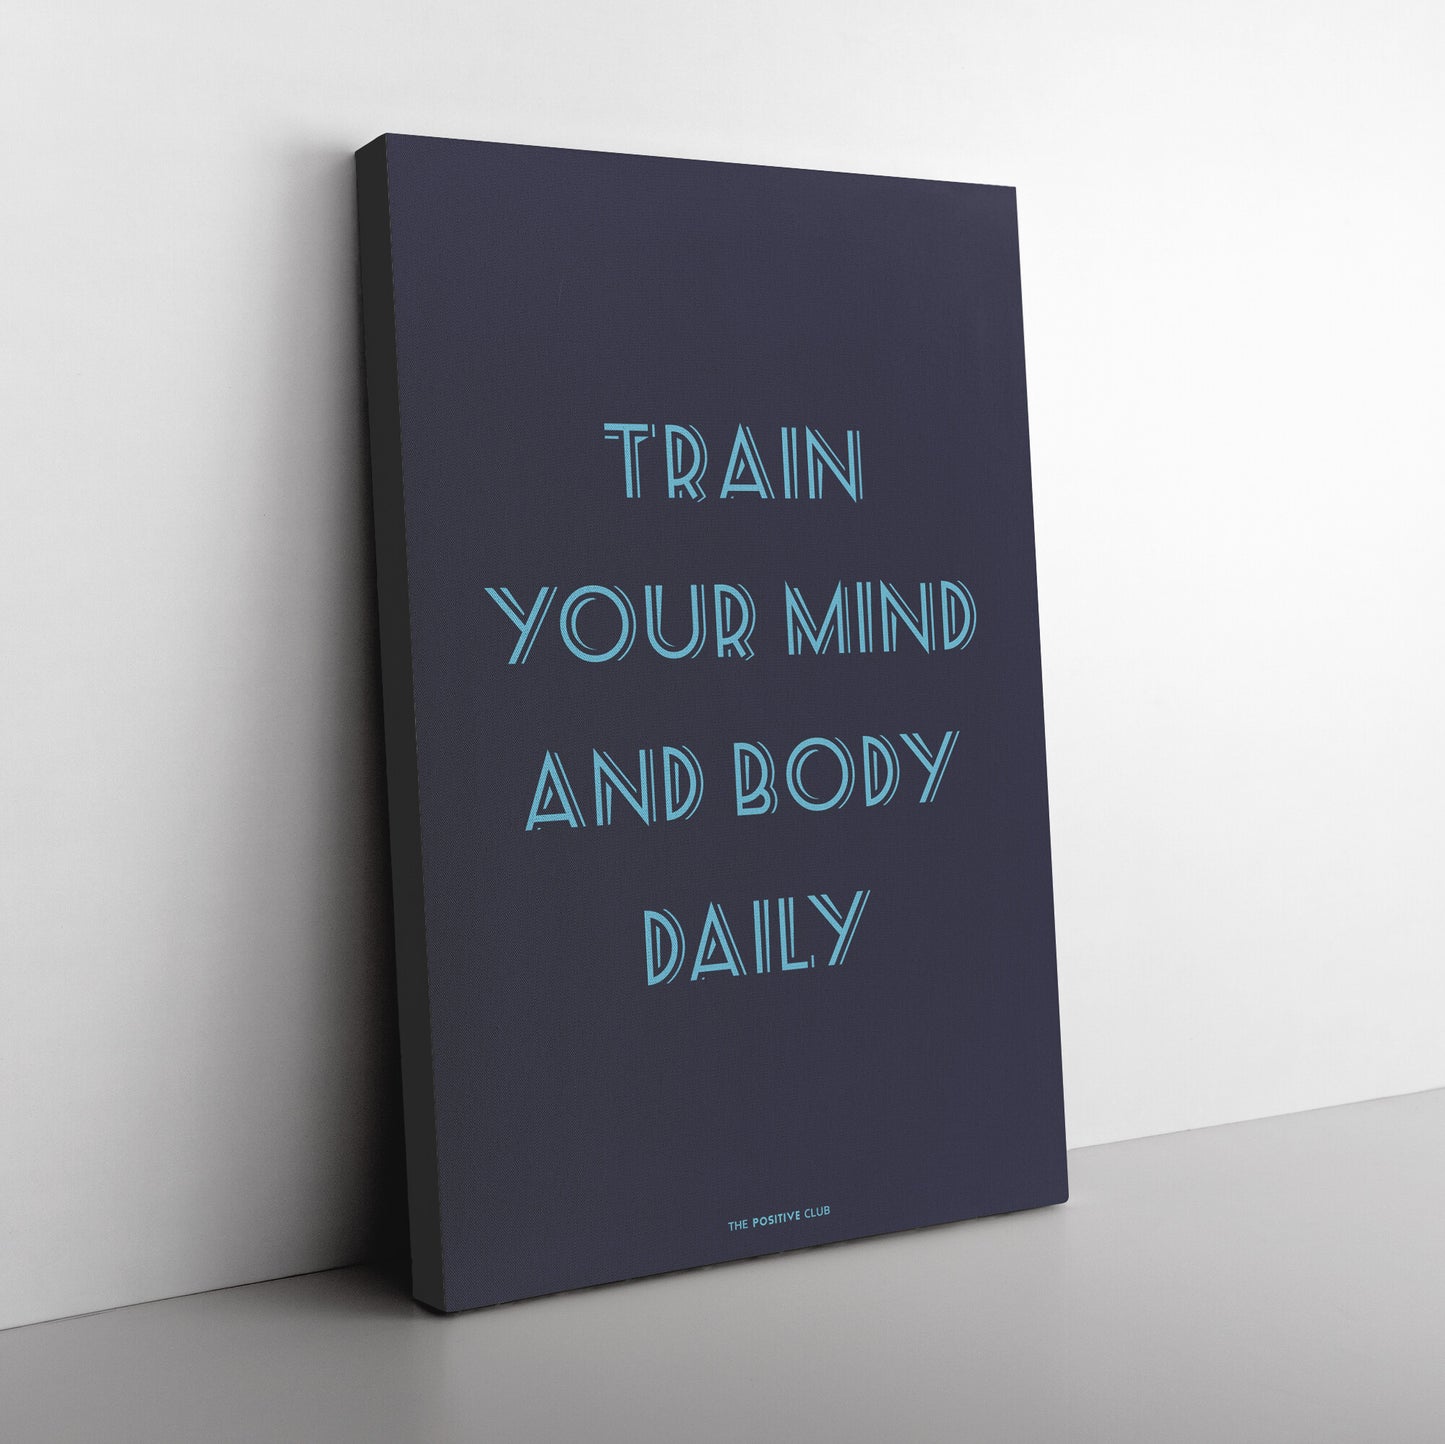 Practice Mind and Body Balance With the Train Collection From